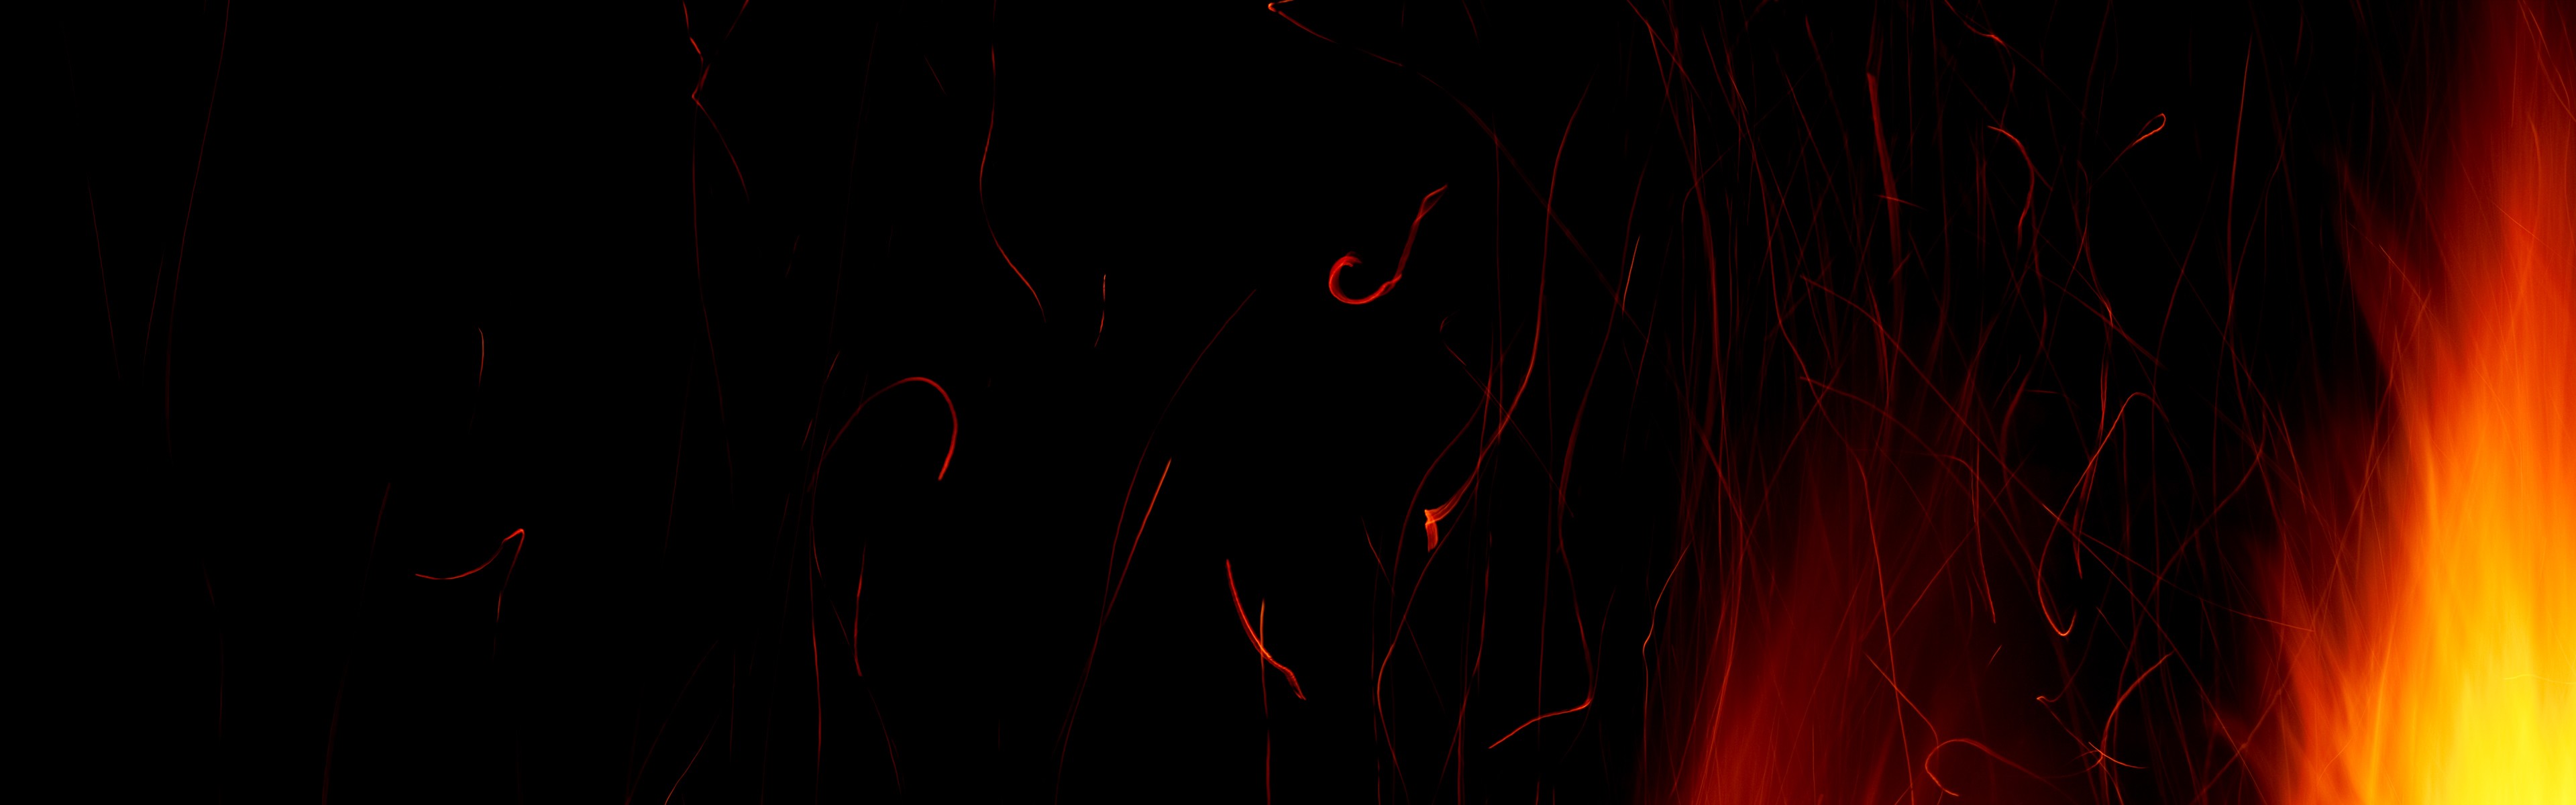 Photo Background Black Fire Multiscreen Textures